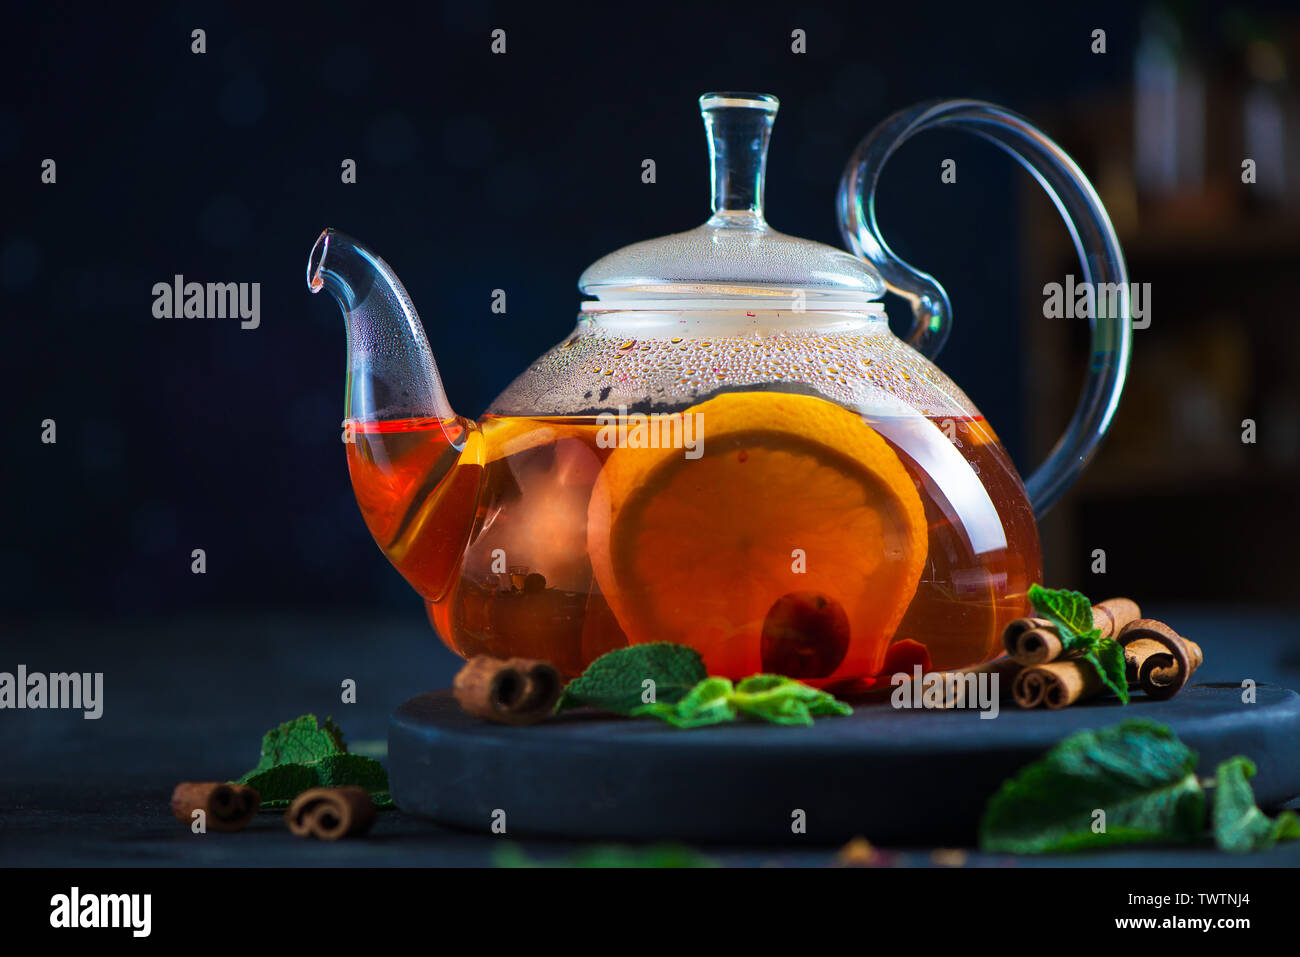 Citrus tea header with cinnamon and mint leaves in a glass teapot, dark food photography with copy space. Stock Photo